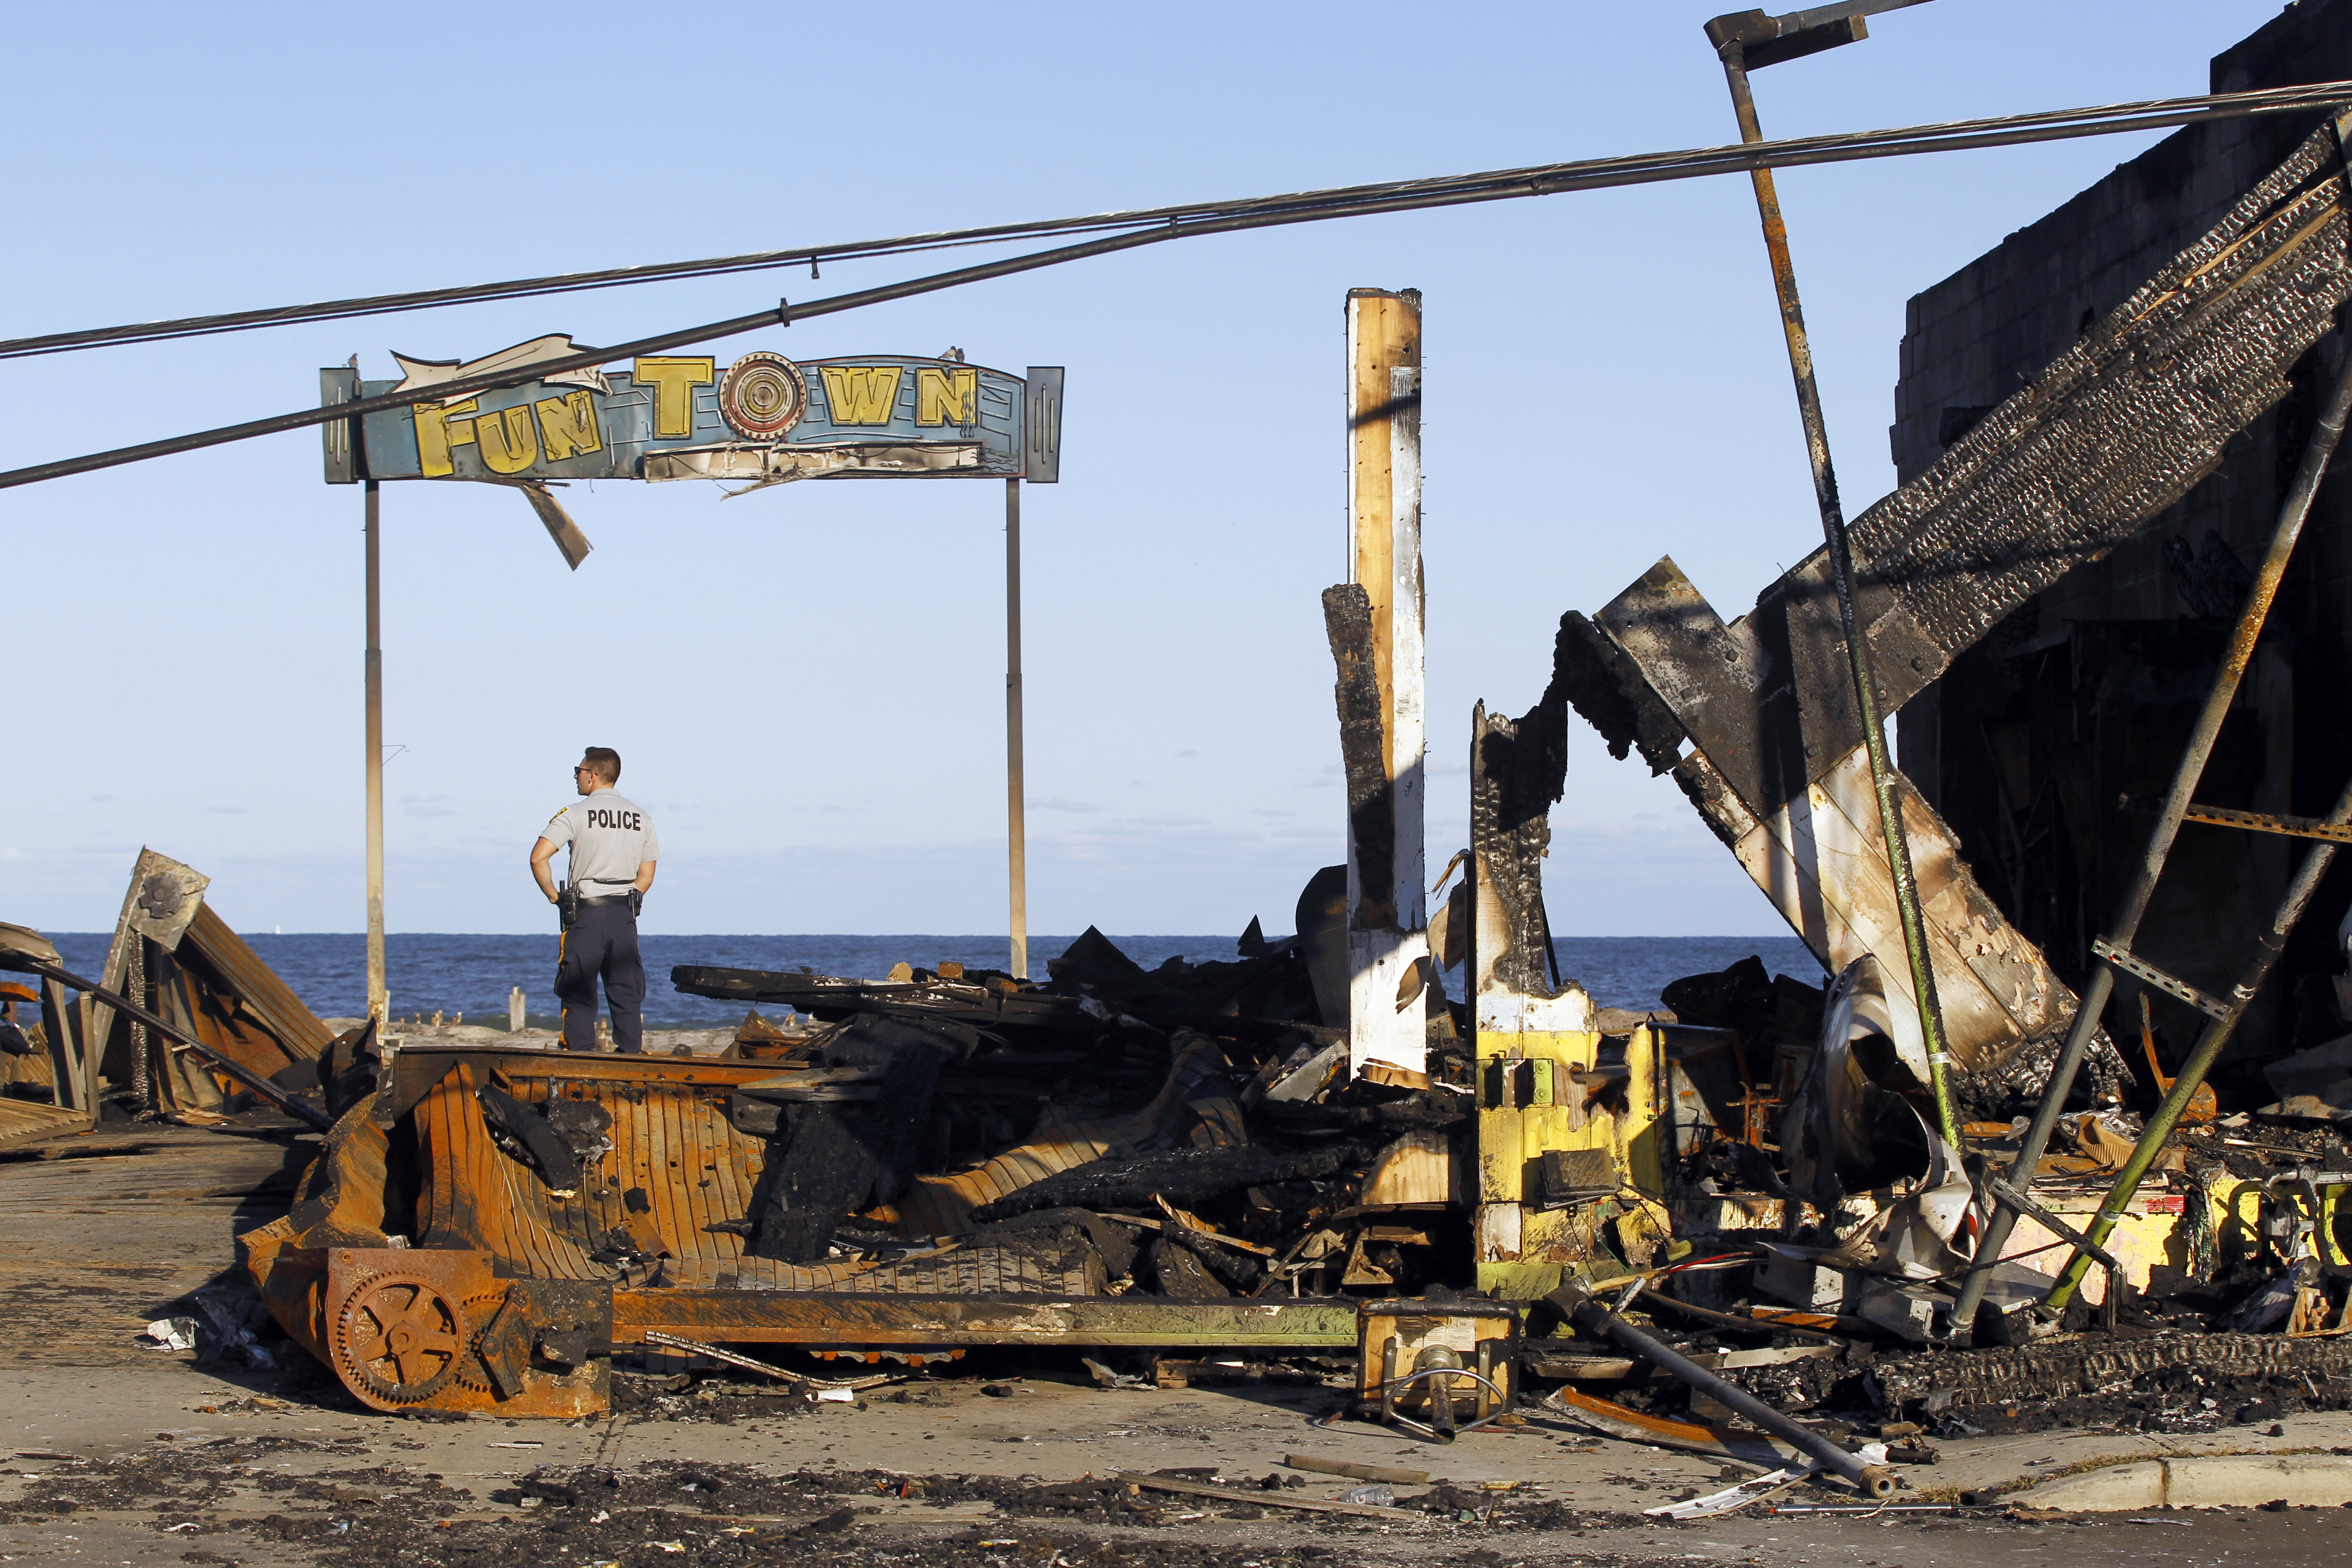 Jersey Shore pier destroyed in a fire set to return even better